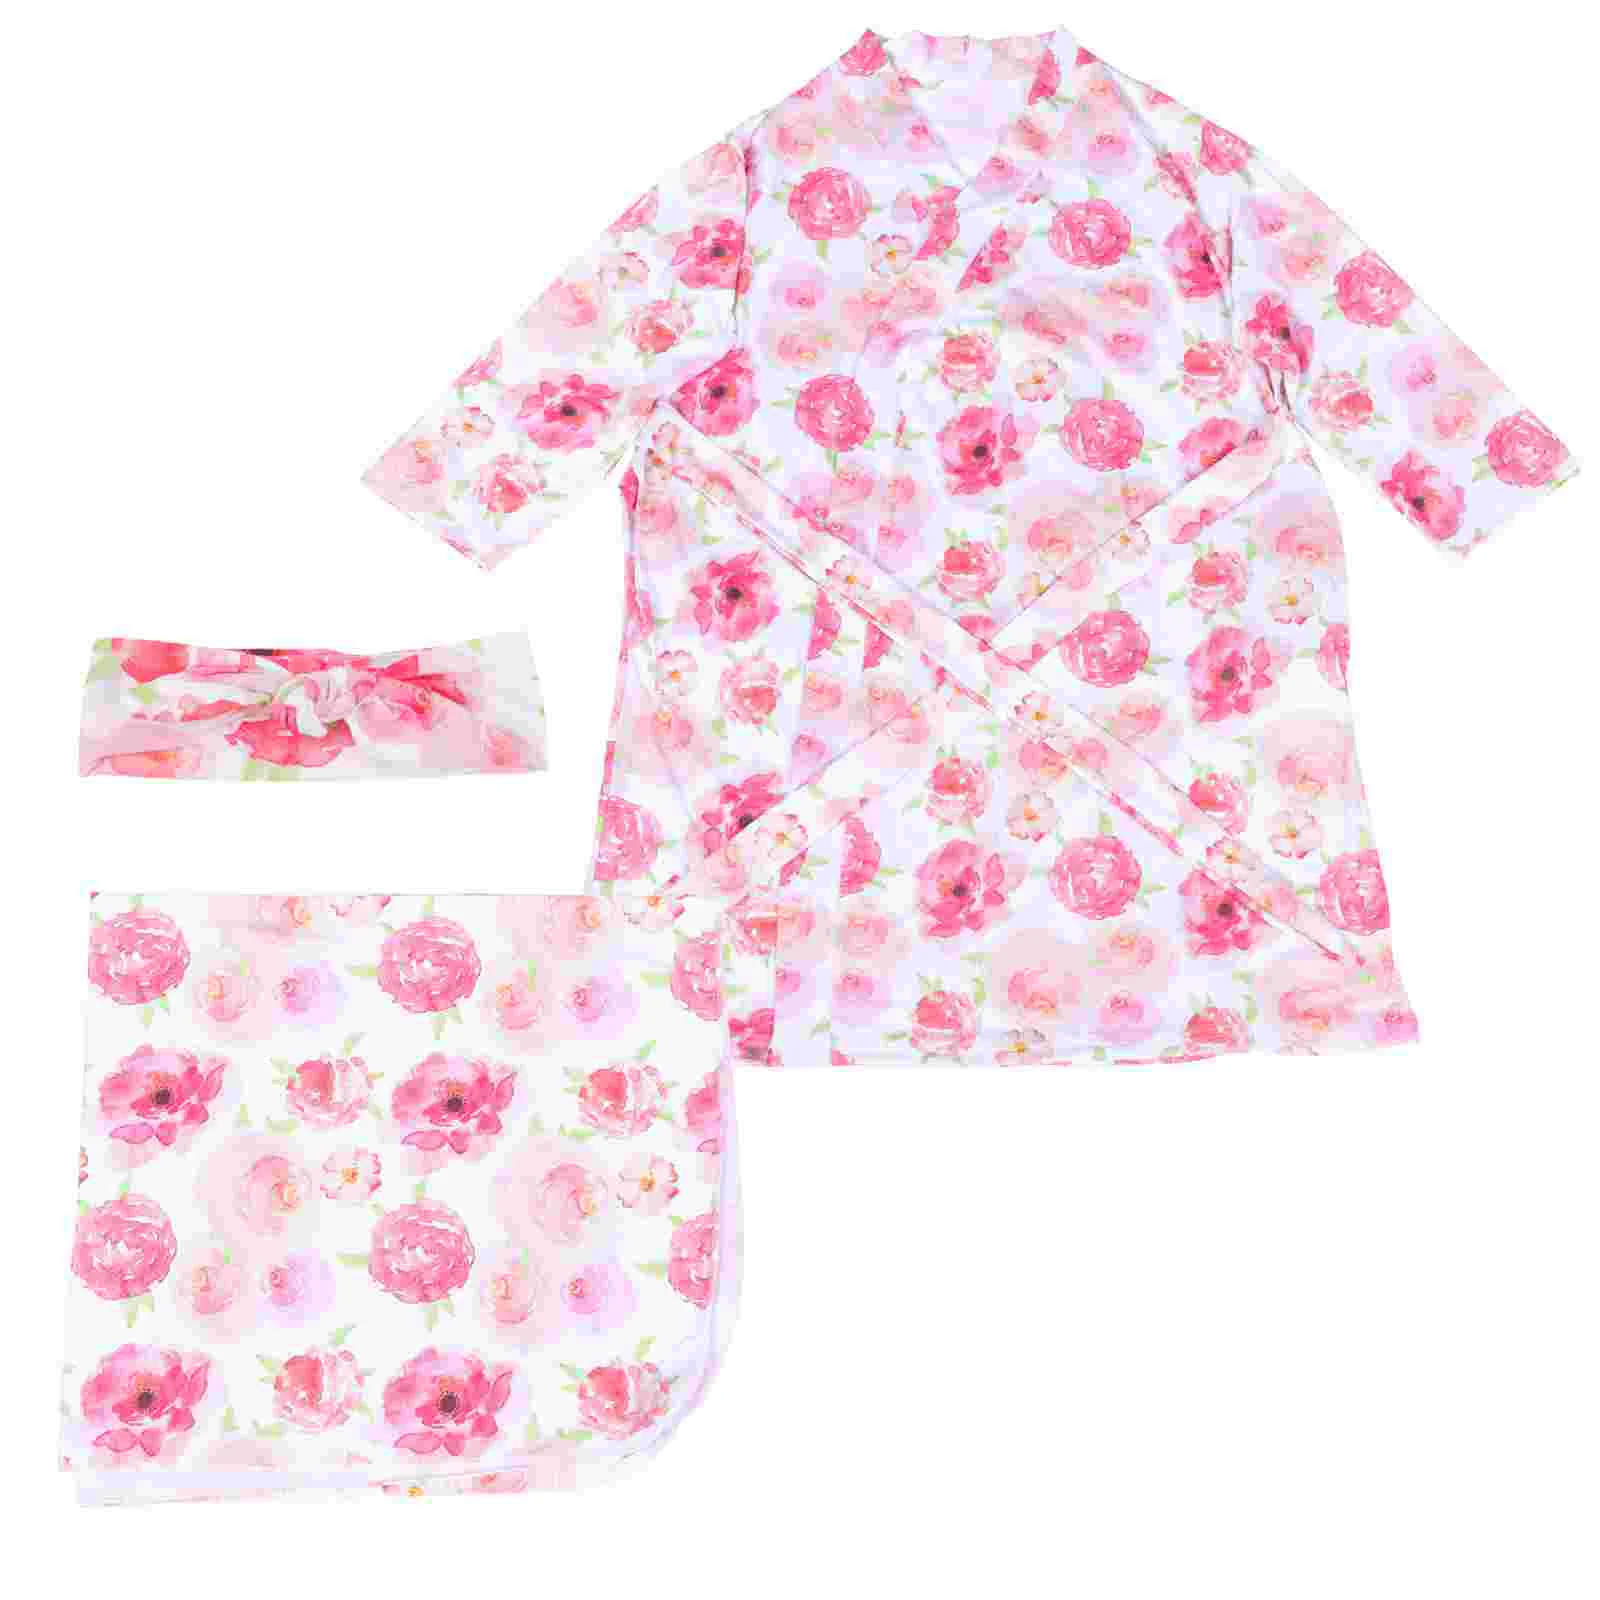 Baby Swaddle Wrap Newborn Receiving Blanket Maternity Pajamas Maternity Robe Matching Baby Floral Baby Blankets Baby Sets Girls enlarge